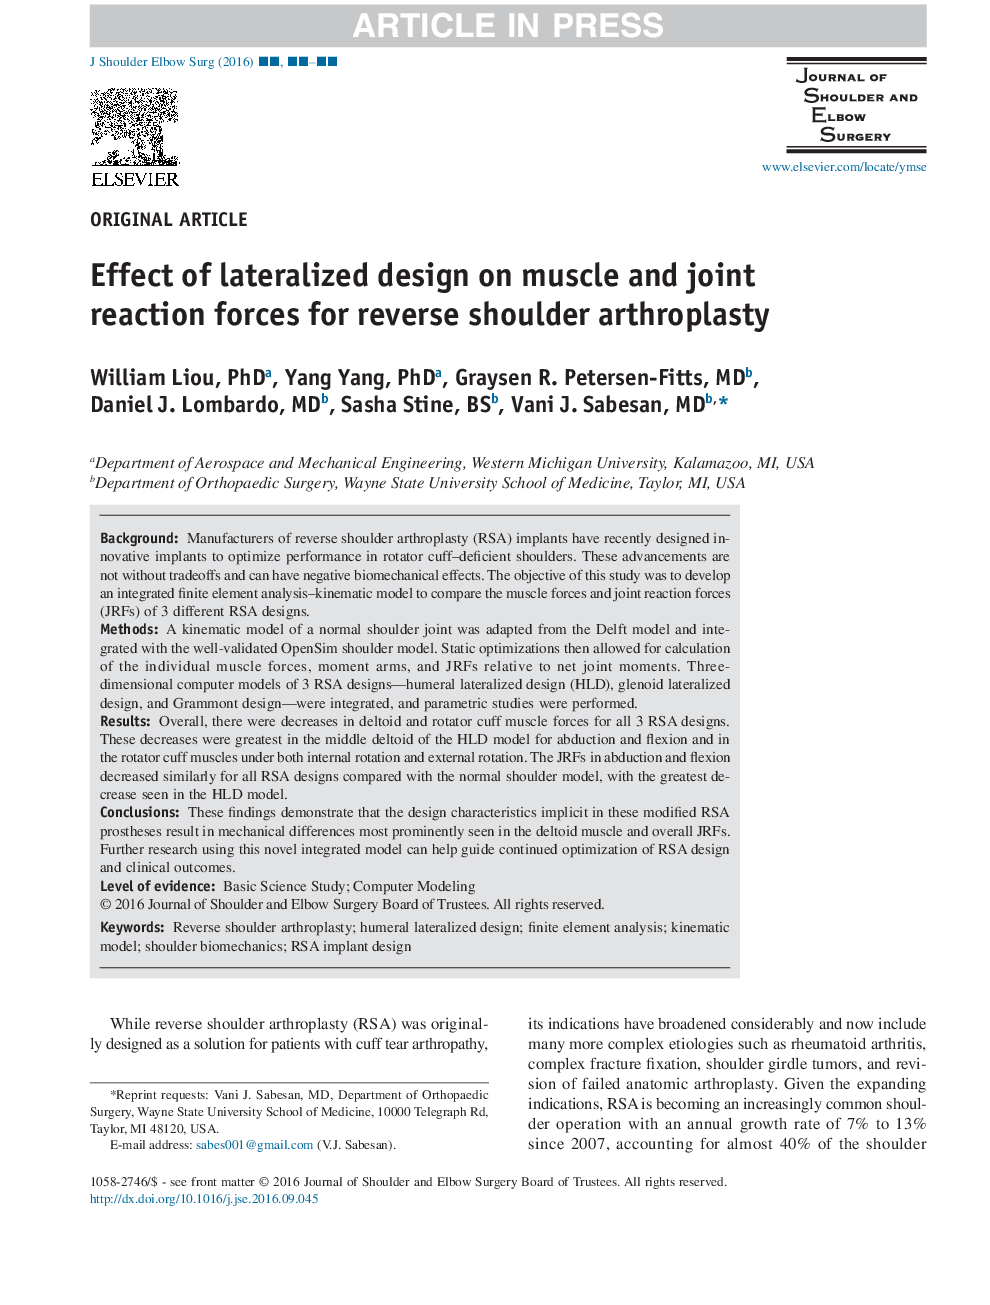 Effect of lateralized design on muscle and joint reaction forces for reverse shoulder arthroplasty